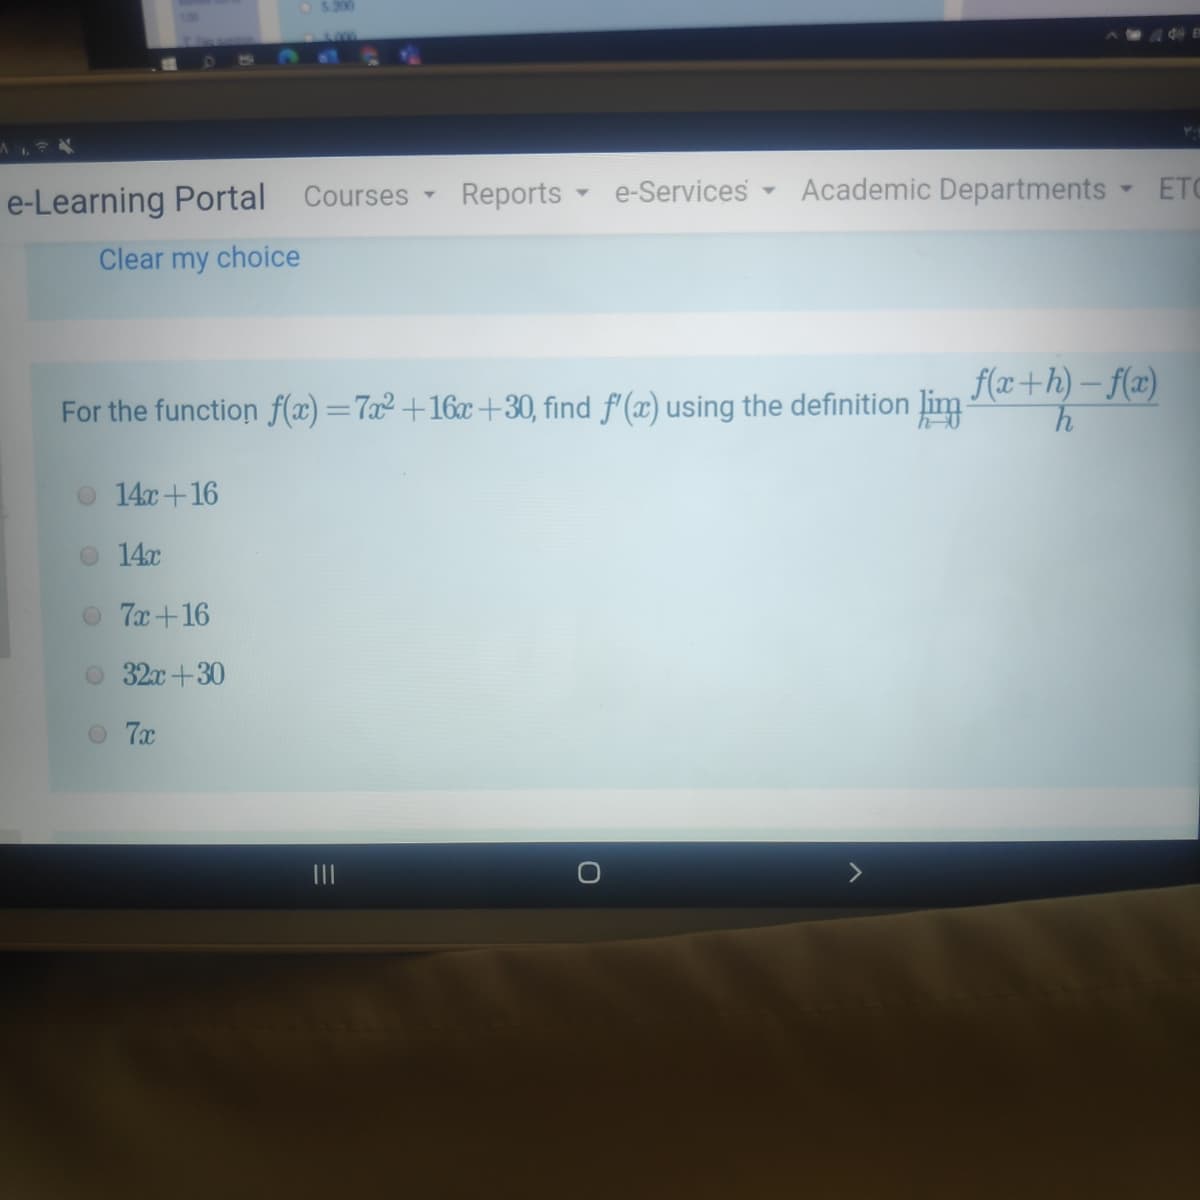 5.200
e-Learning Portal Courses
Reports
e-Services Academic Departments ETC
Clear my choice
f(x+h) – f(x)
For the function f(x) =7x² +16x +30, find f'(x) using the definition lim
o 14c+16
14x
O 7x+16
O 32x+30
O 7x
II
